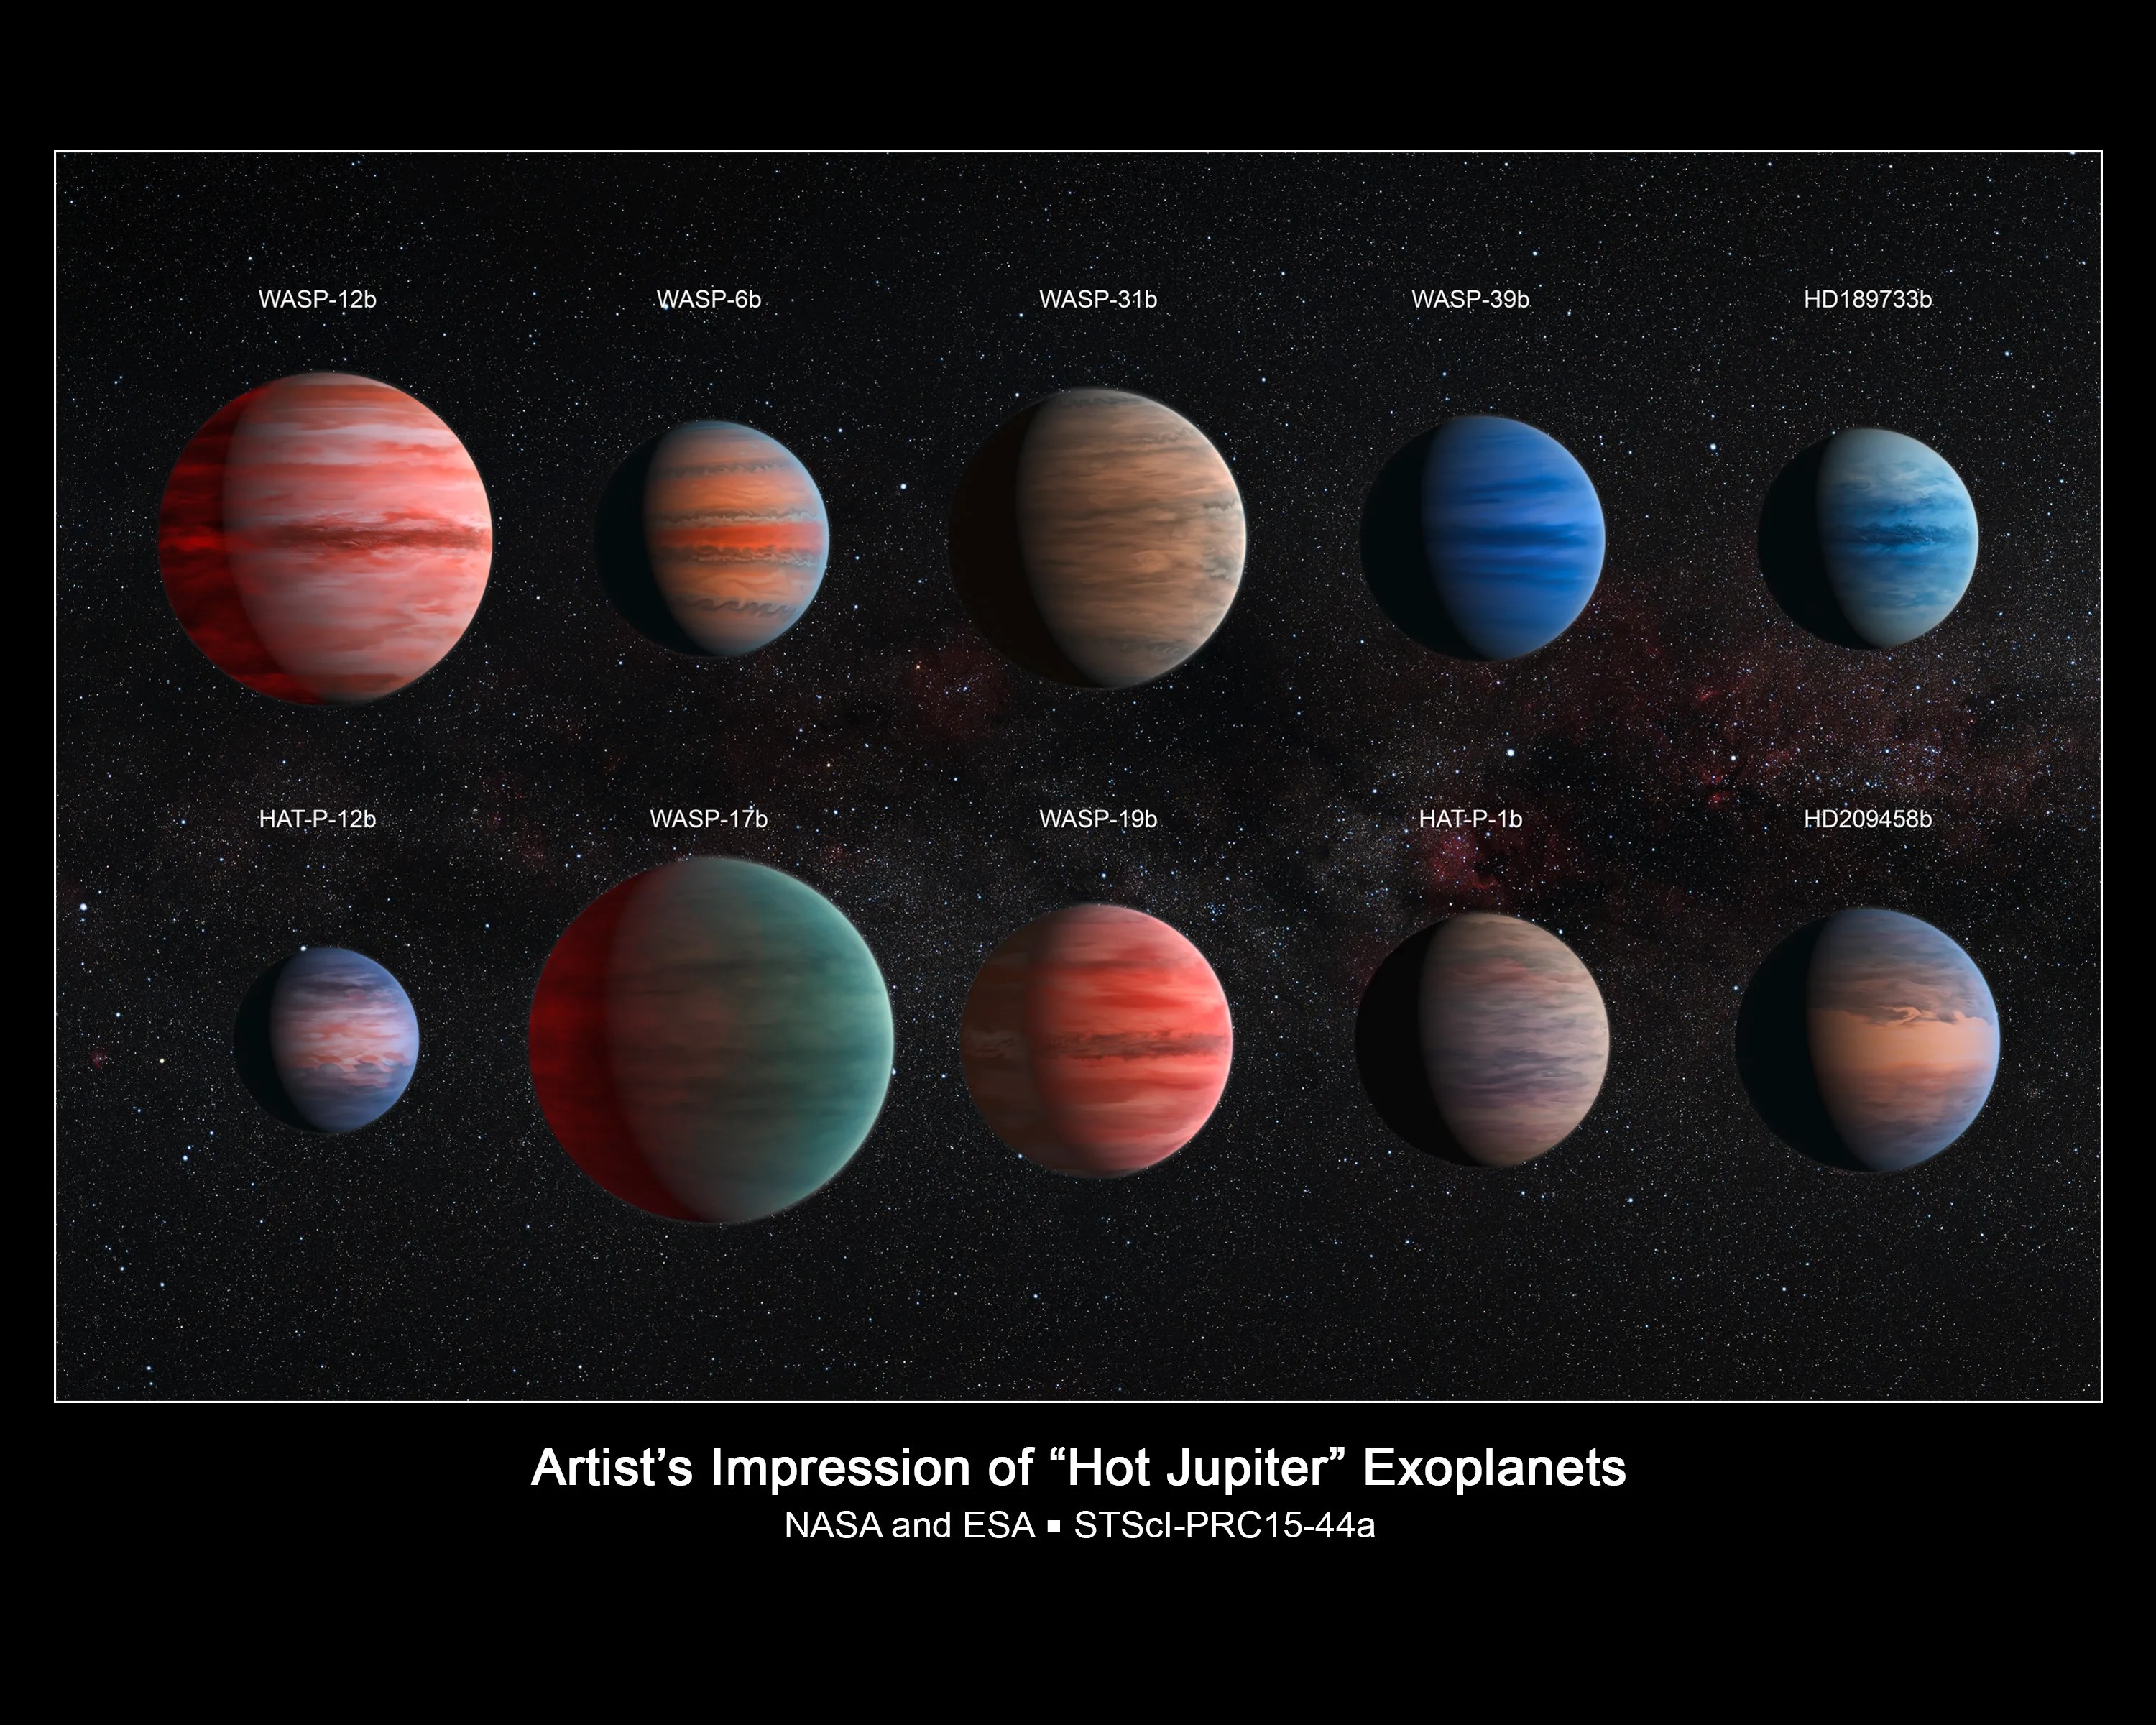 artist's impression of the ten hot Jupiter exoplanets studied by astronomer David Sing and his colleagues